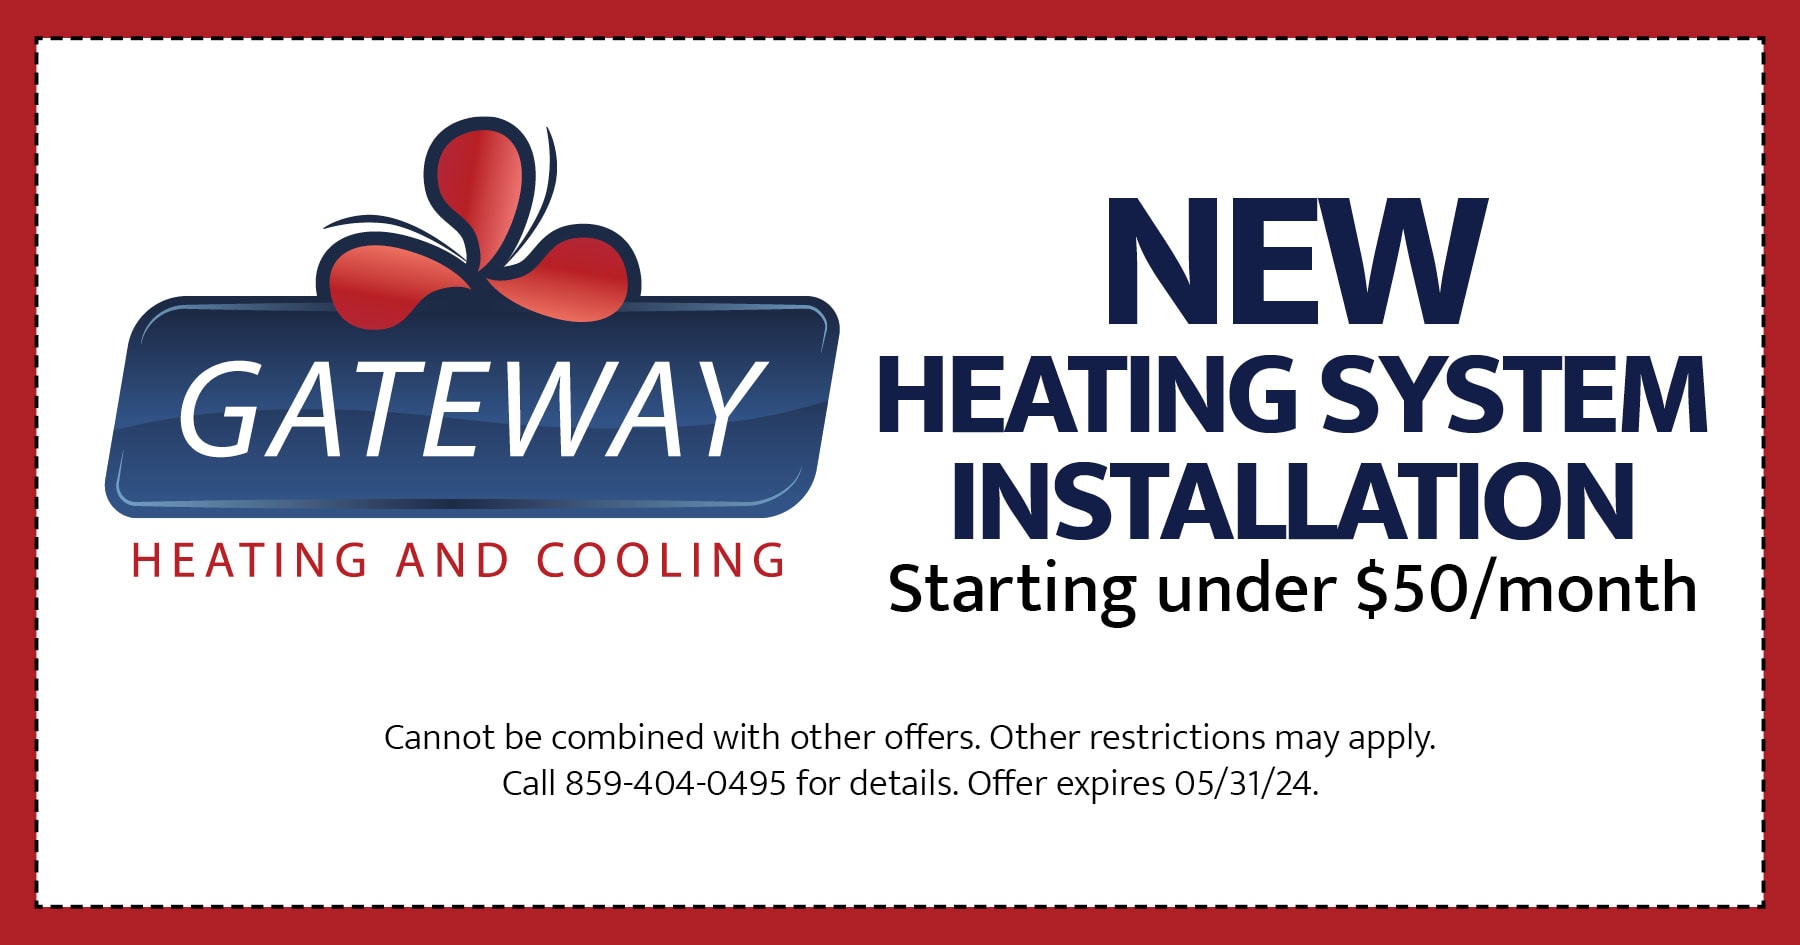 New heating system installation. Starting under $50 a month. Cannot be combined with other offers. Other restrictions may apply. Call 859 404 0495 for details. Expires 05/31/2024